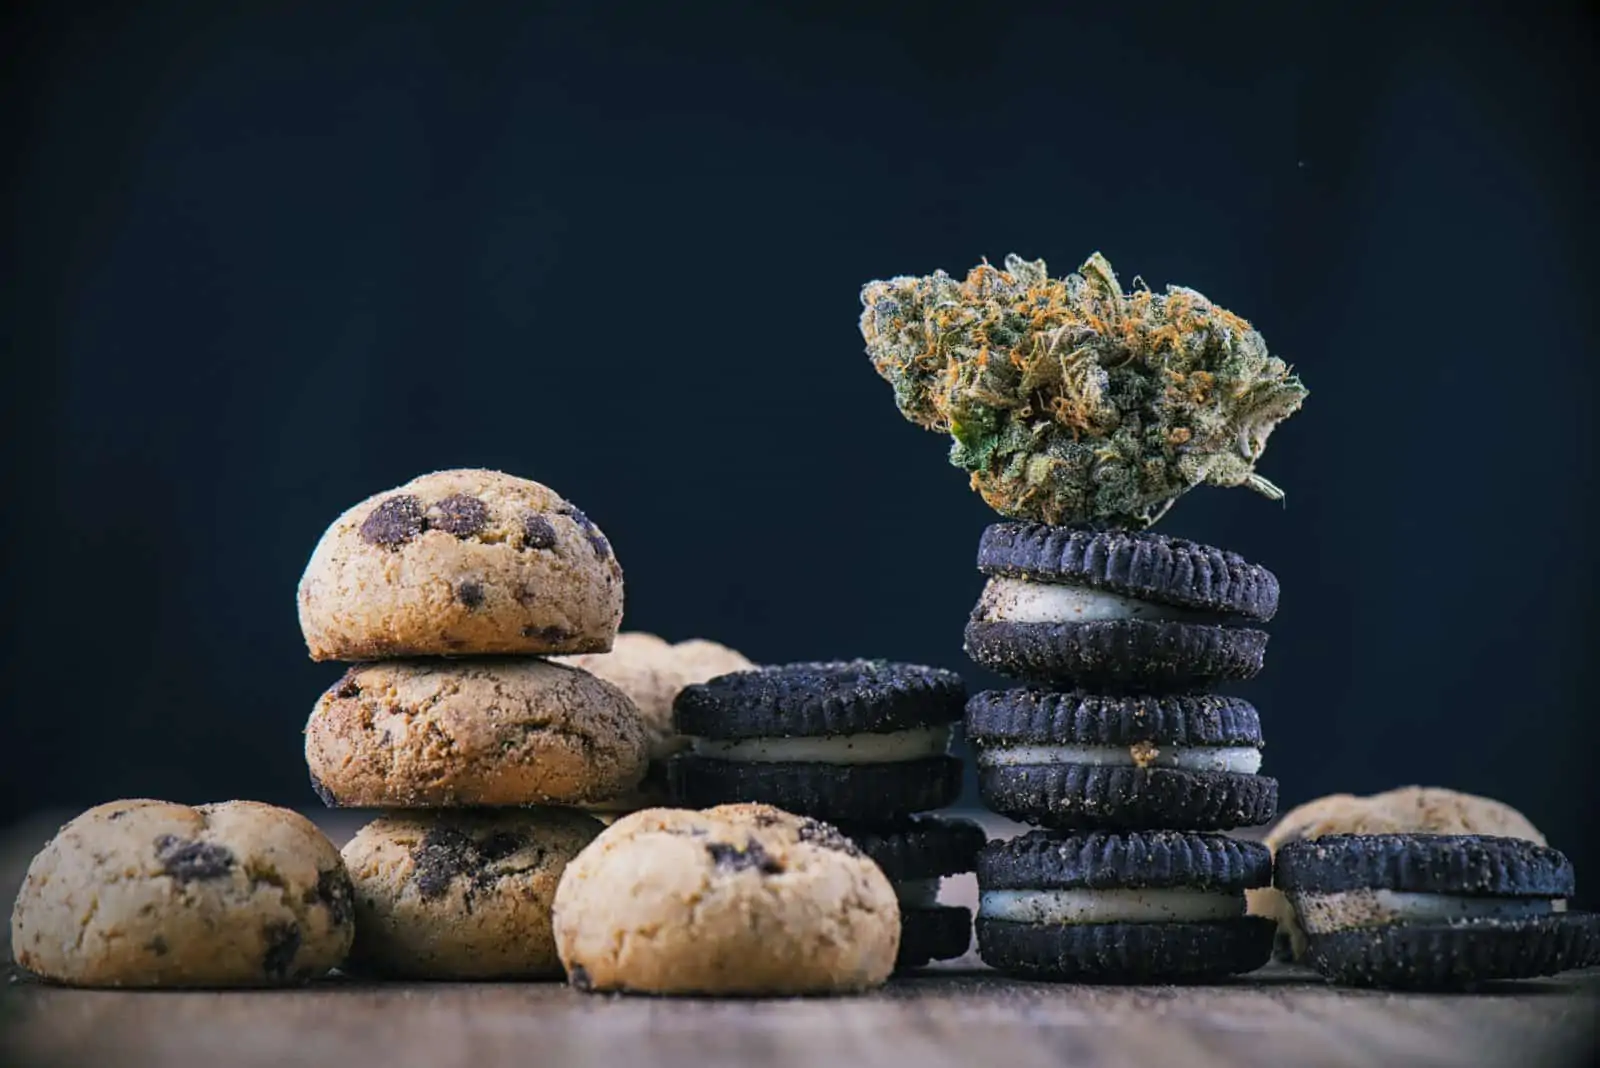 Tips for Testing the Potency of Cannabis Edibles